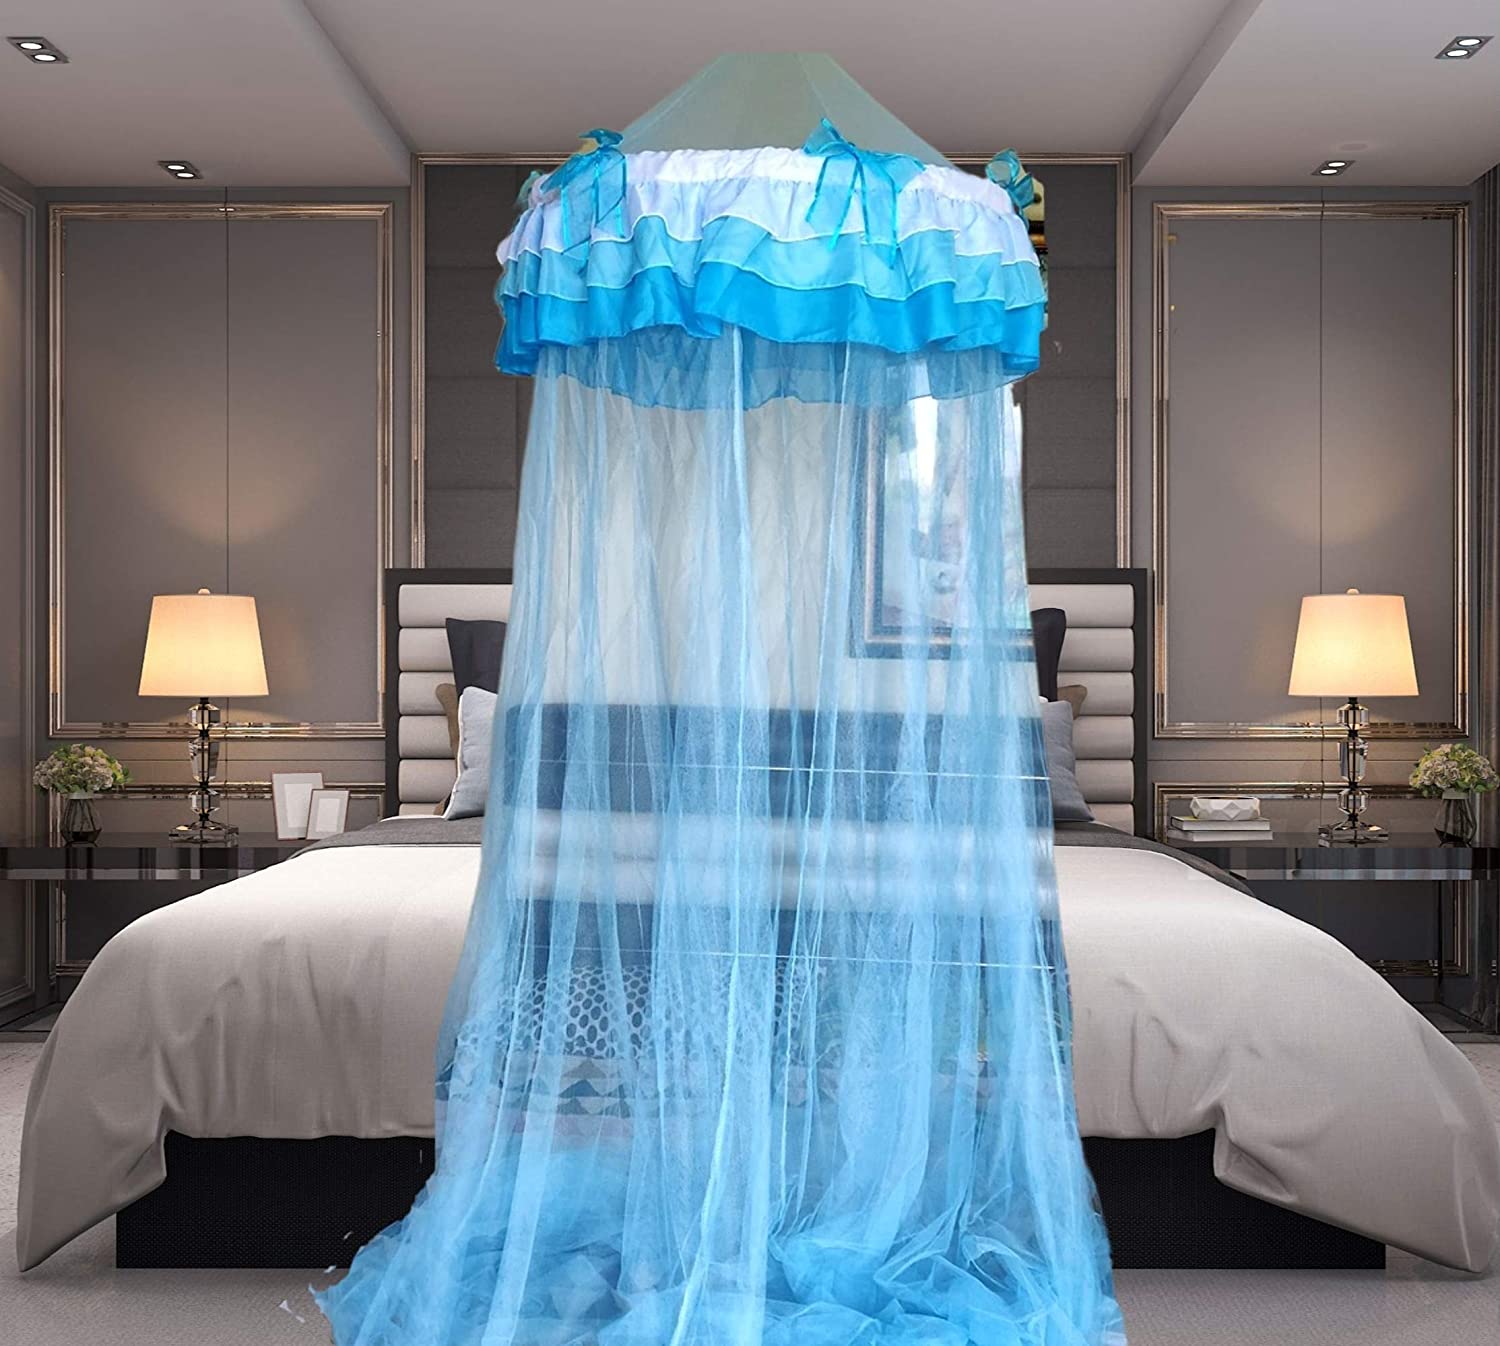 Kiddale Canopy Mosquito Net for Bed